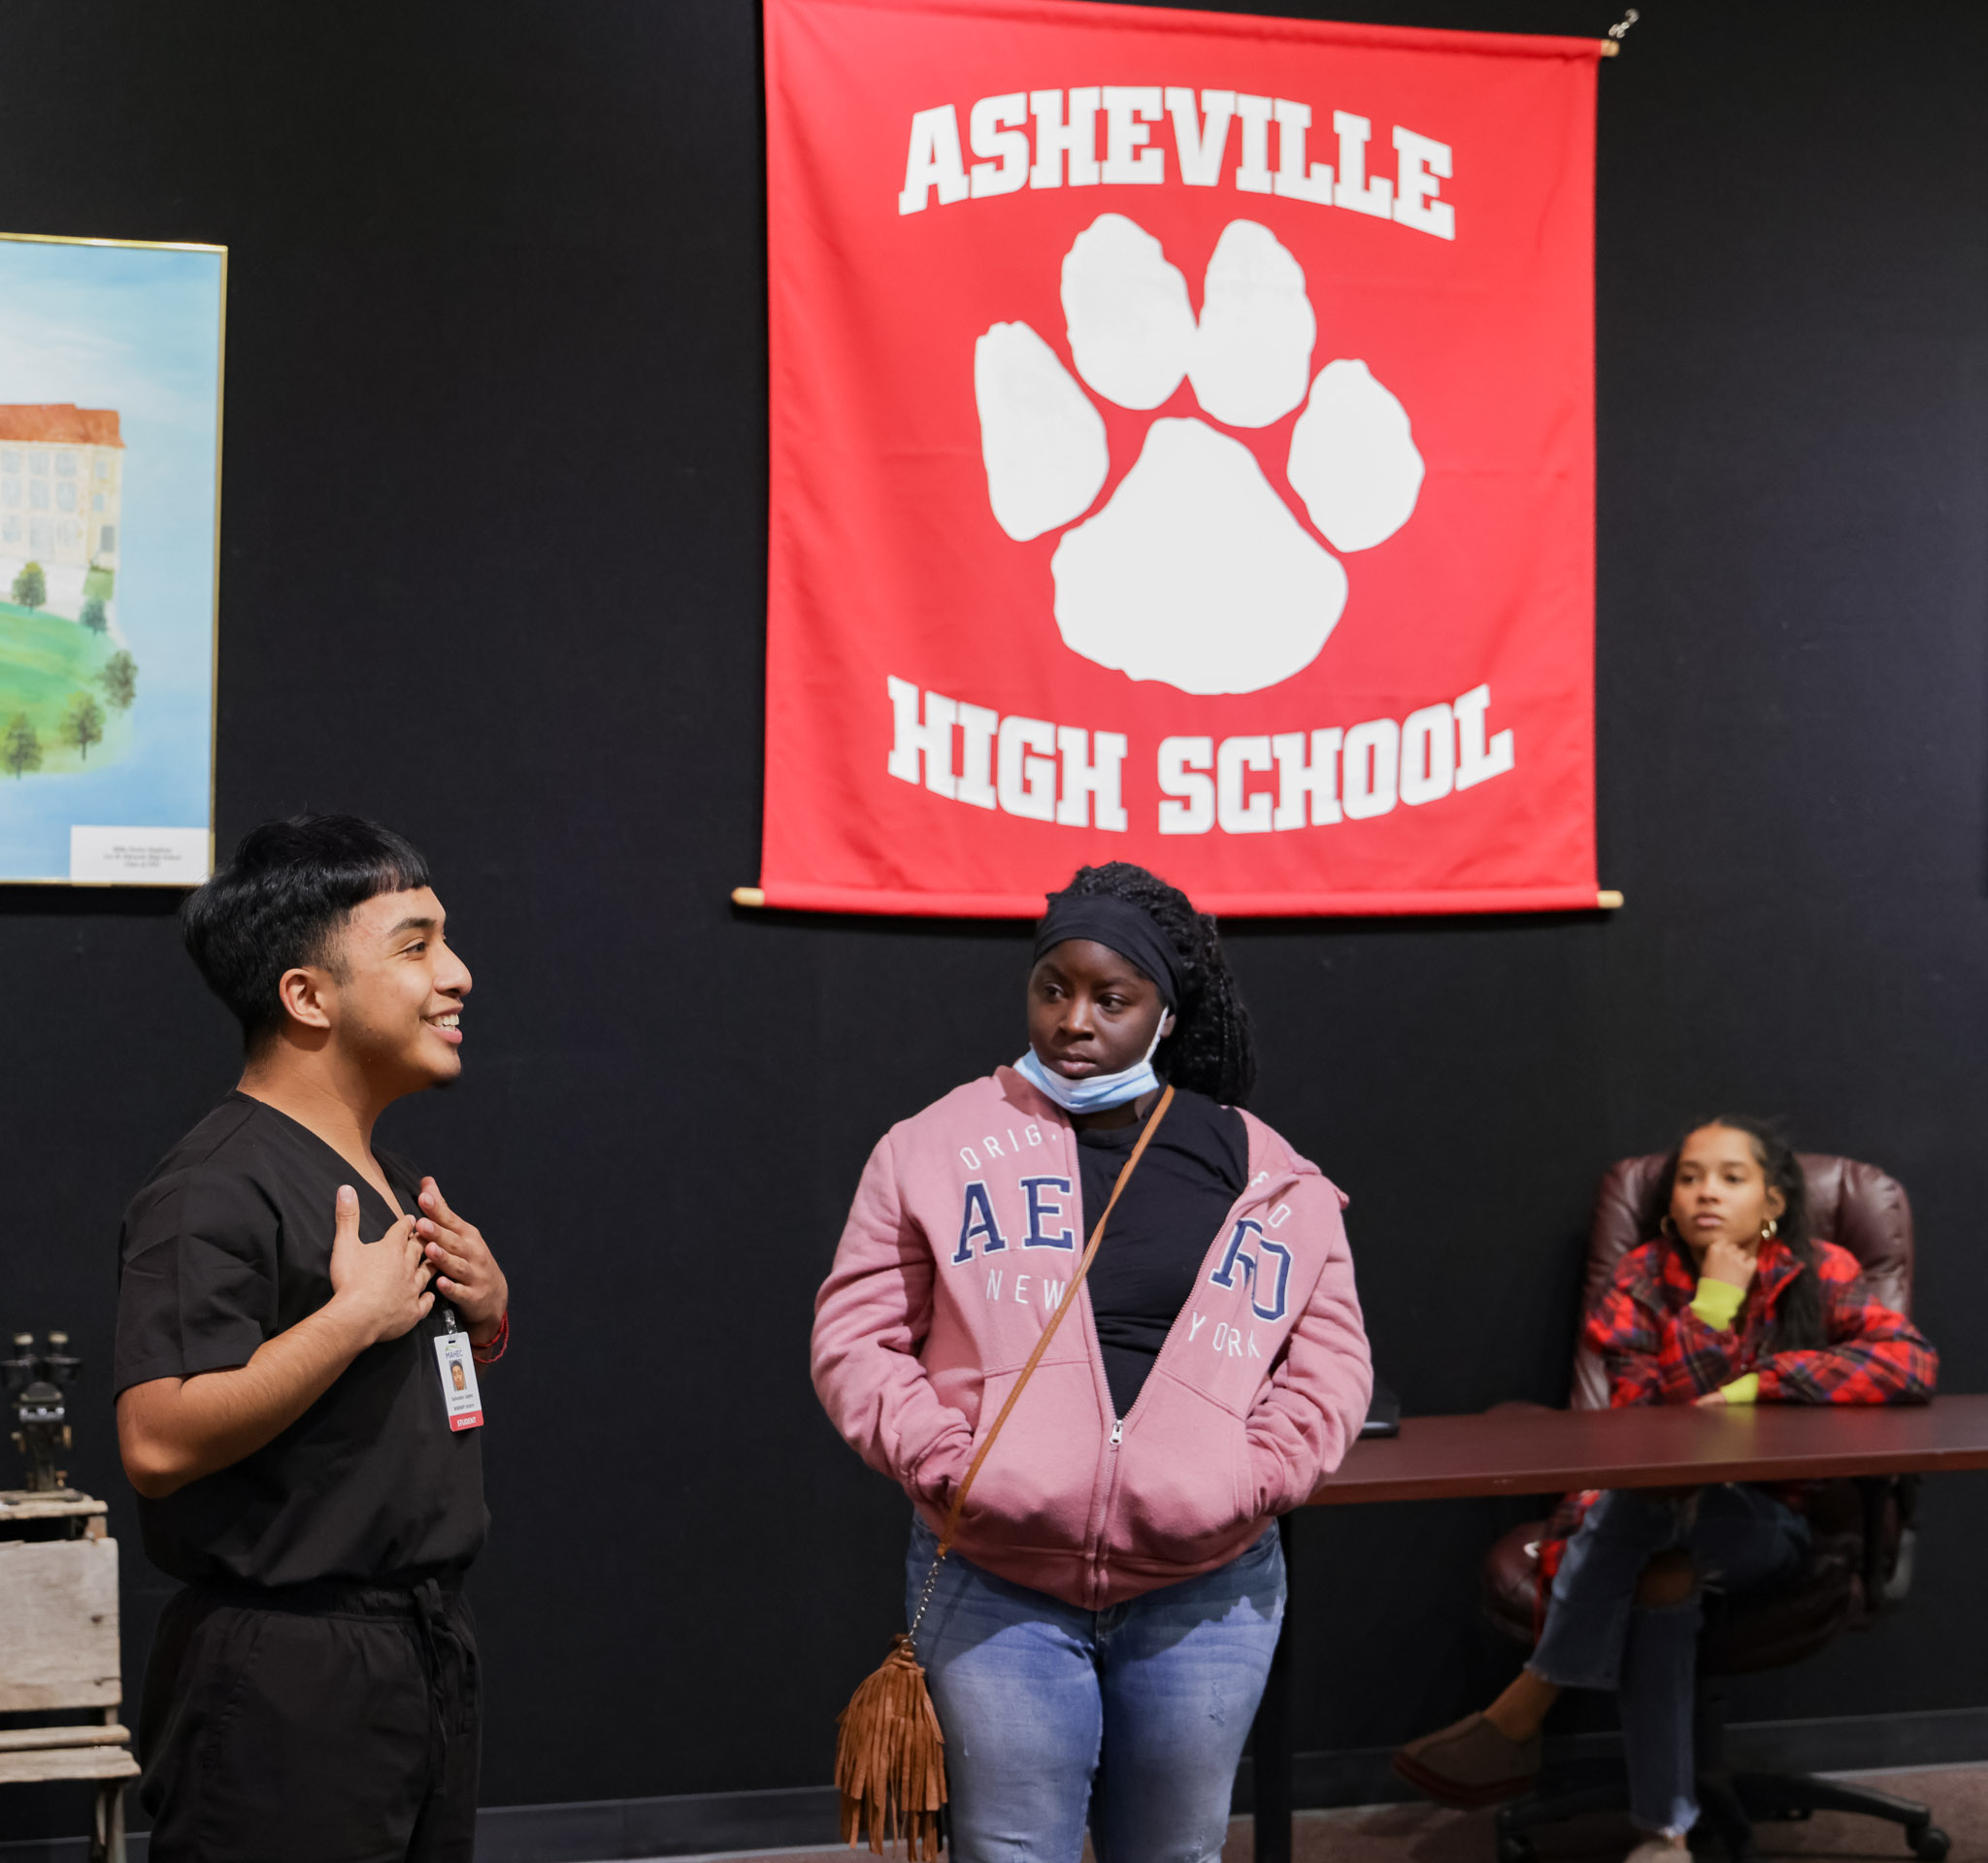 Students at Asheville High School speak to some of the challenges they face as youth in public schools in 2022.